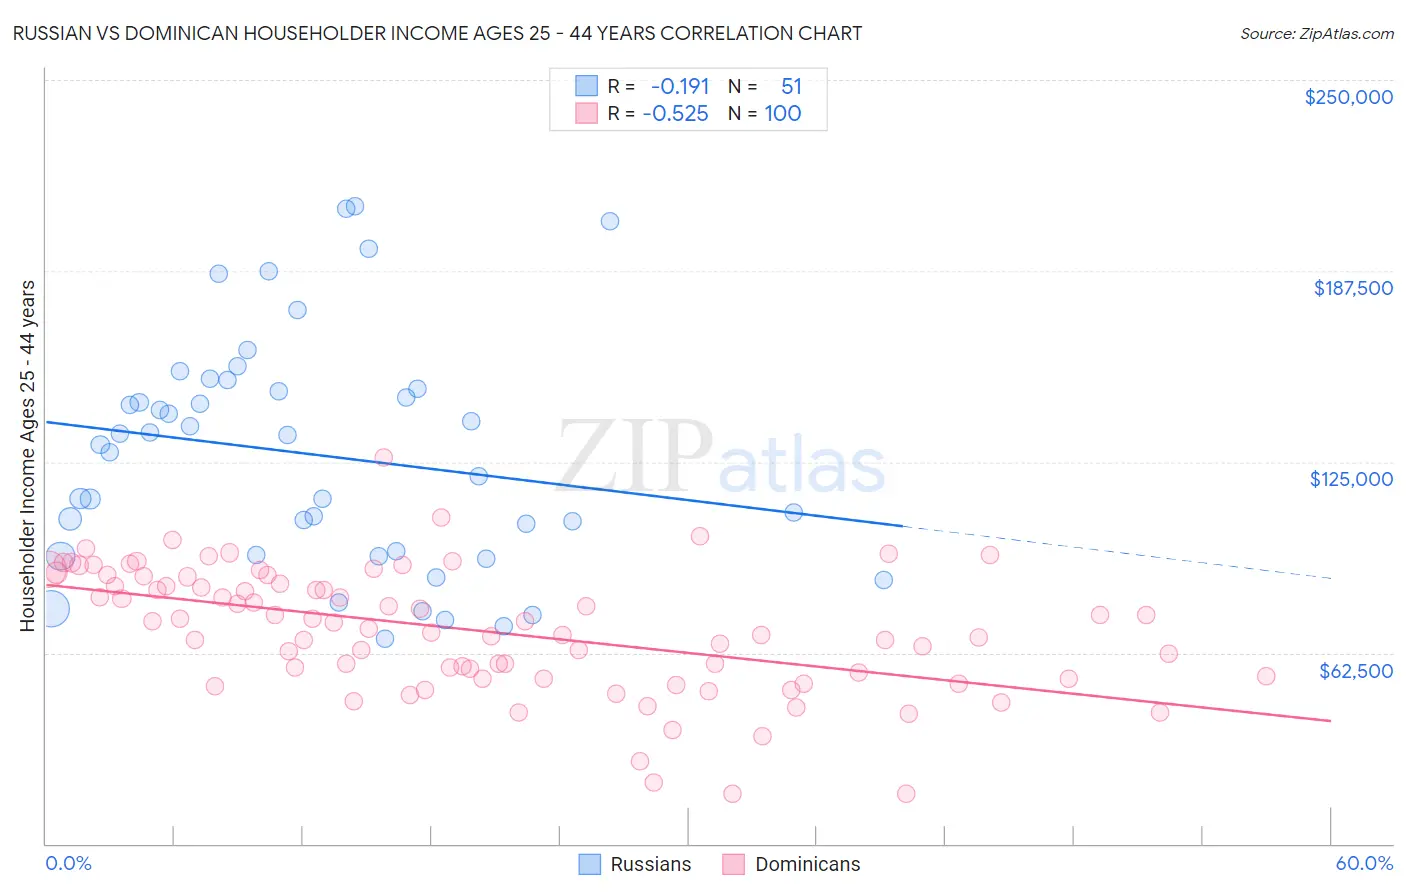 Russian vs Dominican Householder Income Ages 25 - 44 years